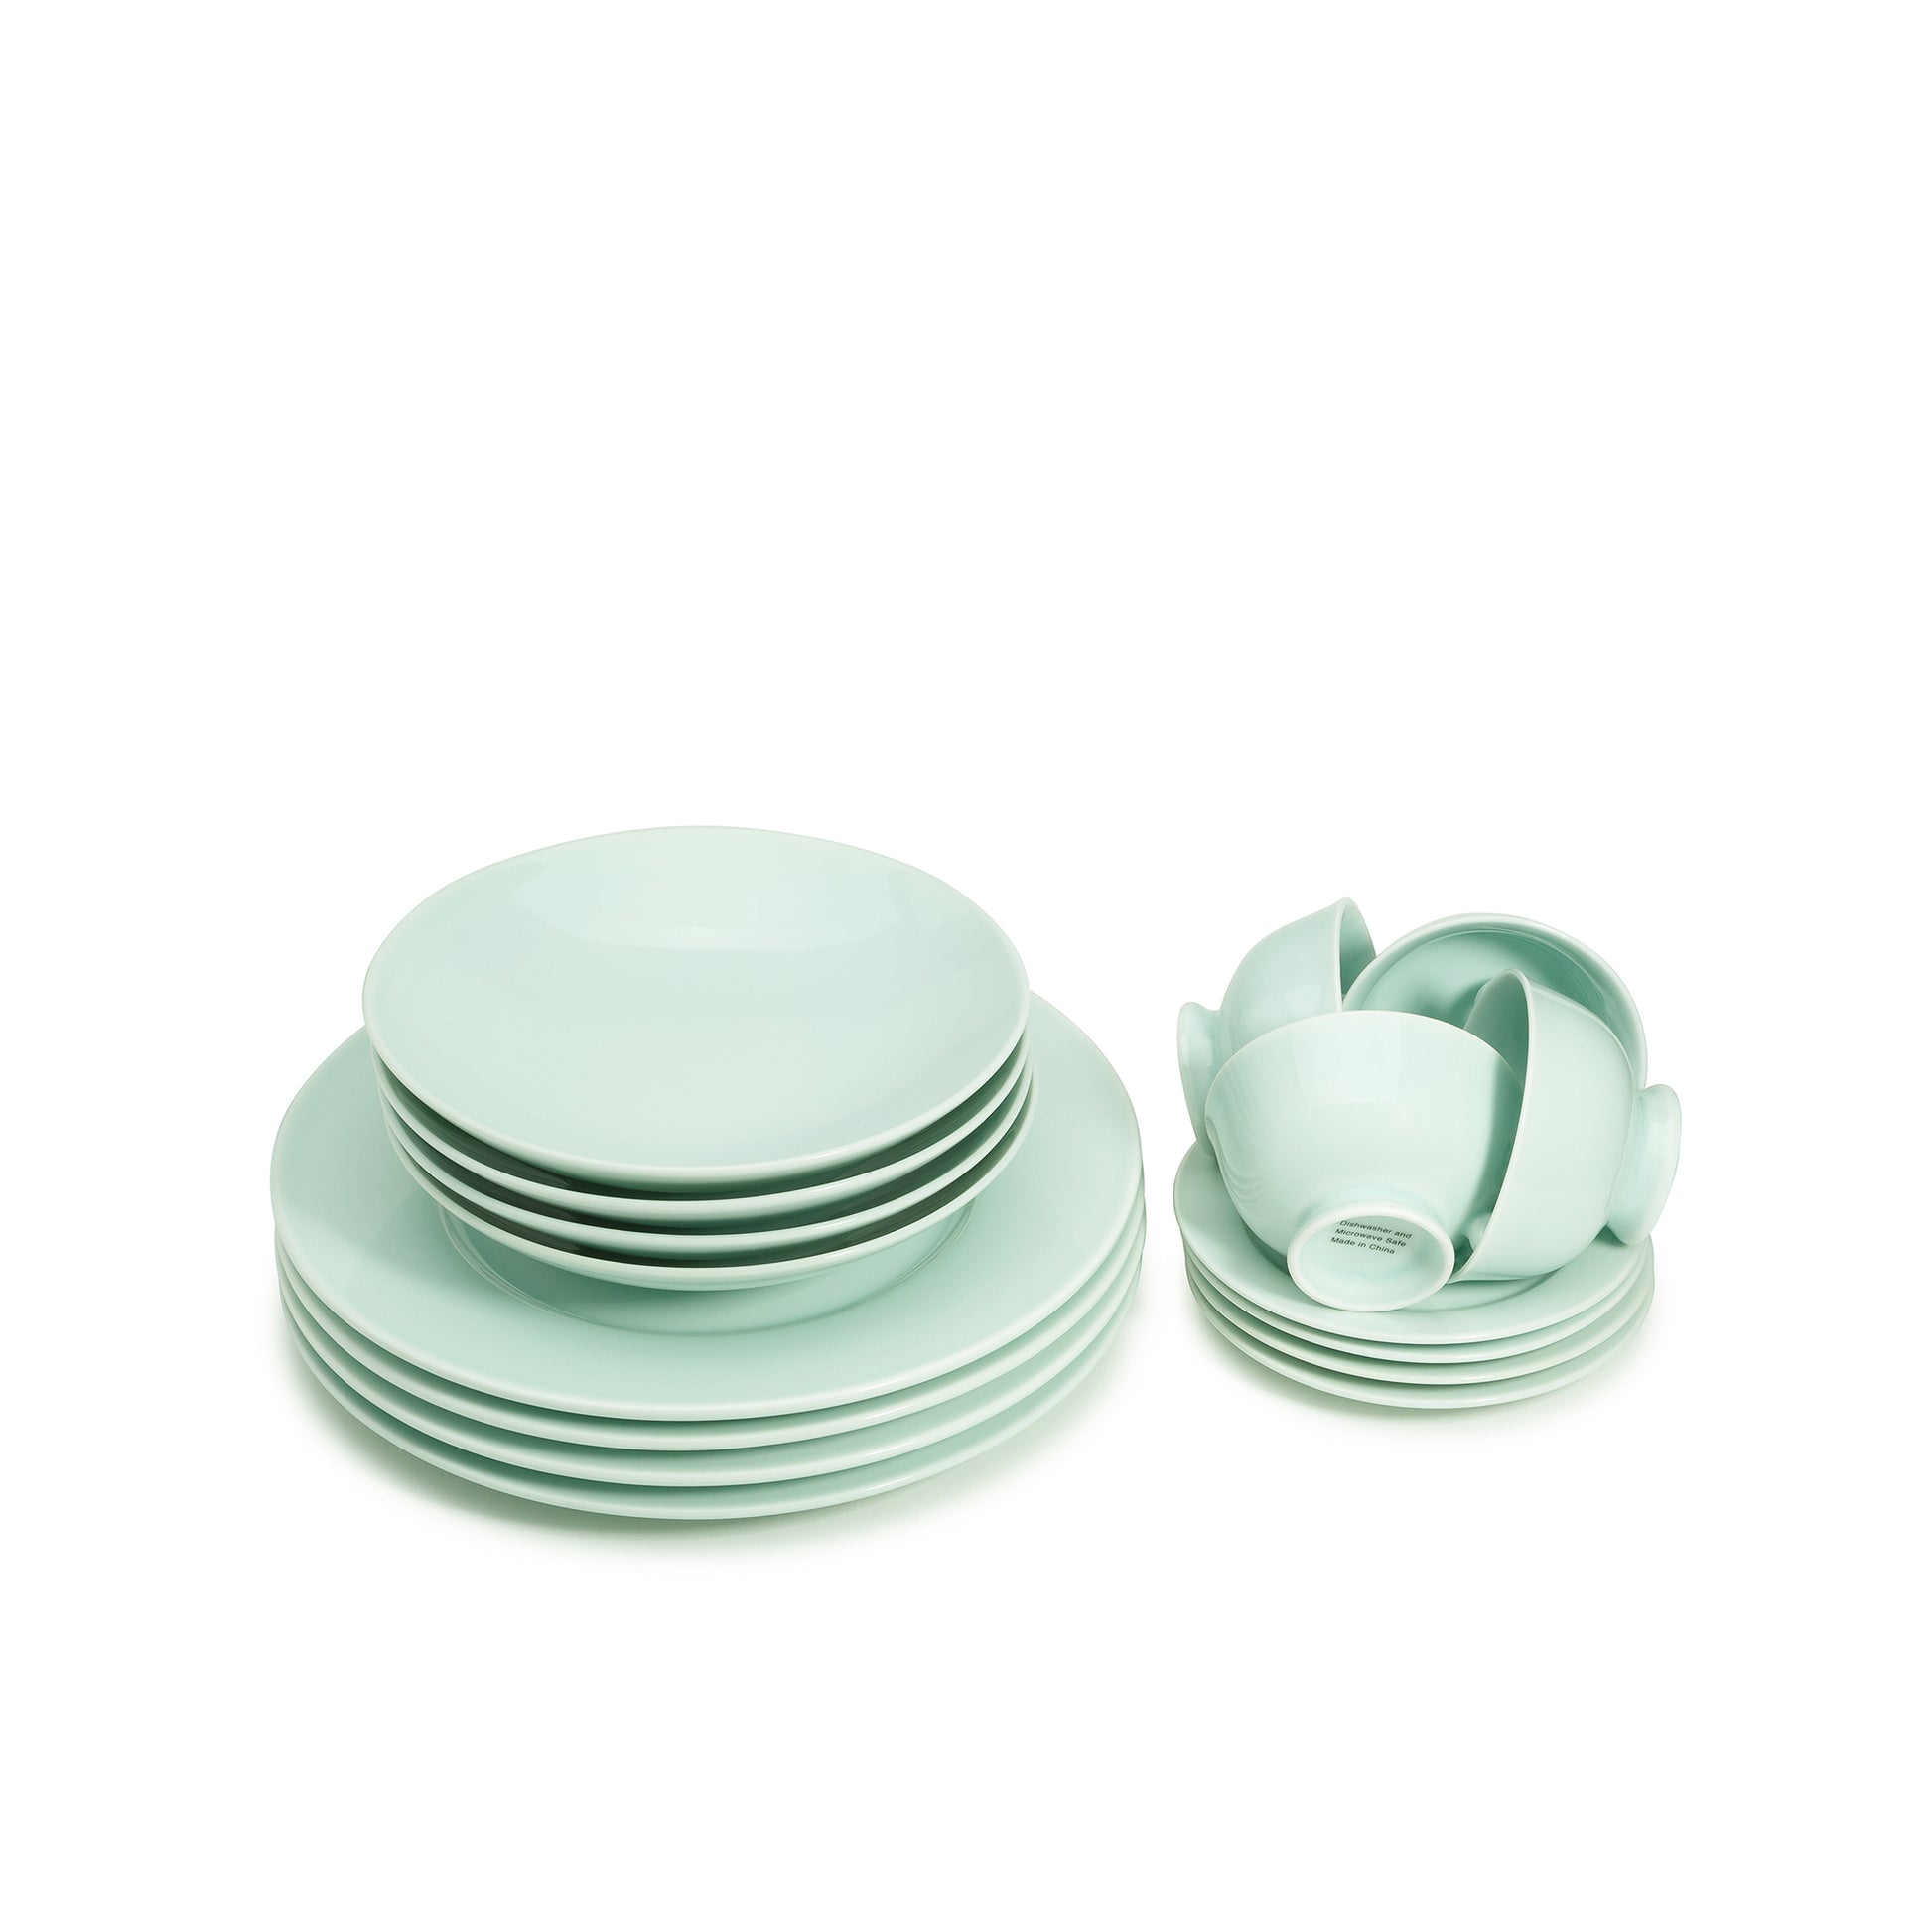 16 piece green celadon porcelain dinnerware set, dinner plates, 8" salad bowls, coffee cups and saucers, media 2 of 5